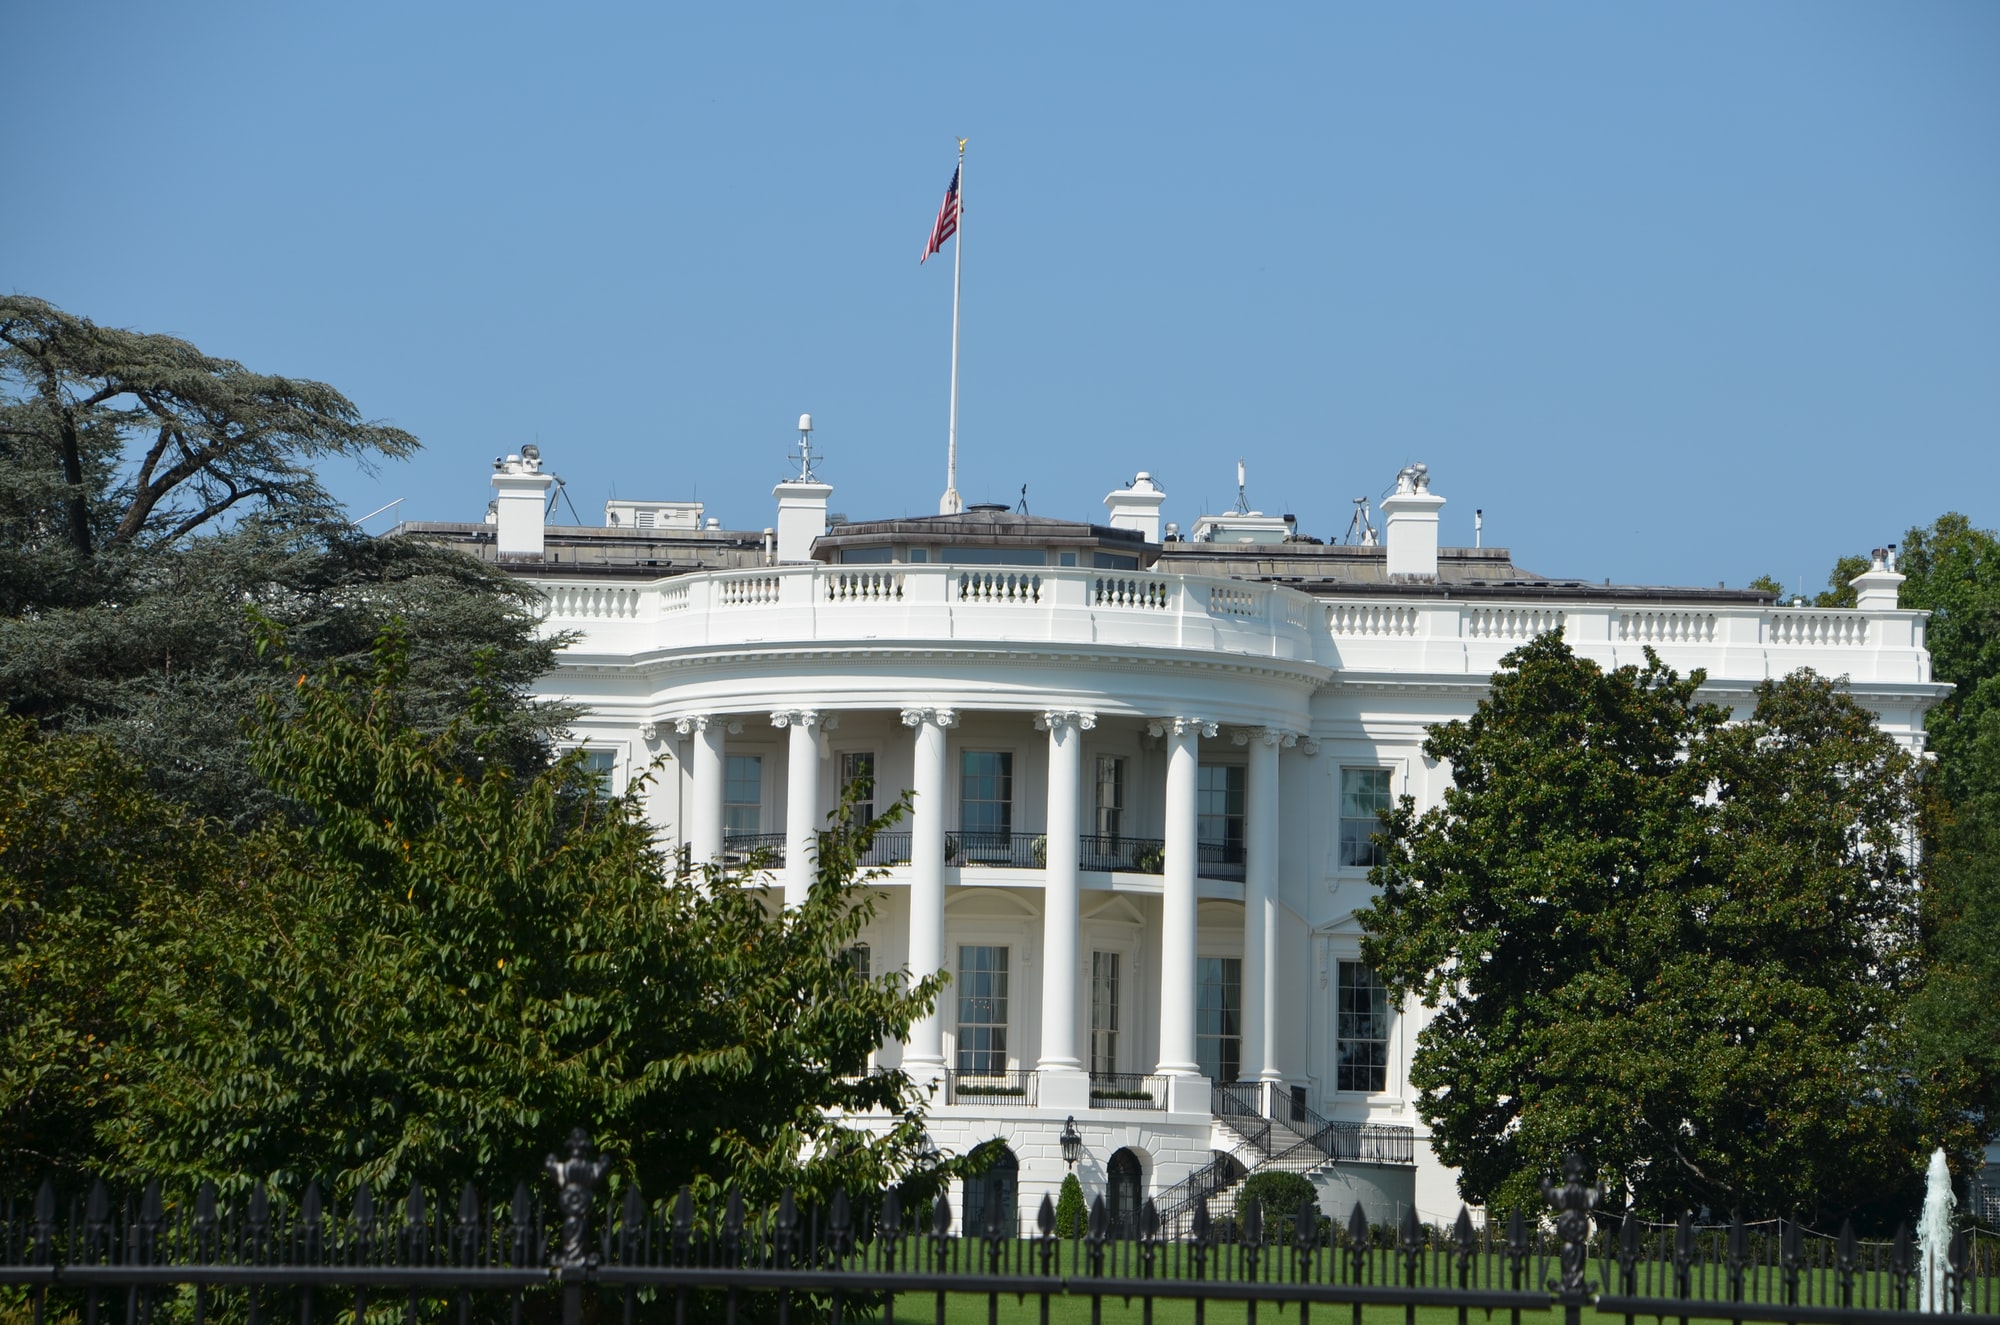 ThinkWater Initiatives Featured in White House Press Release